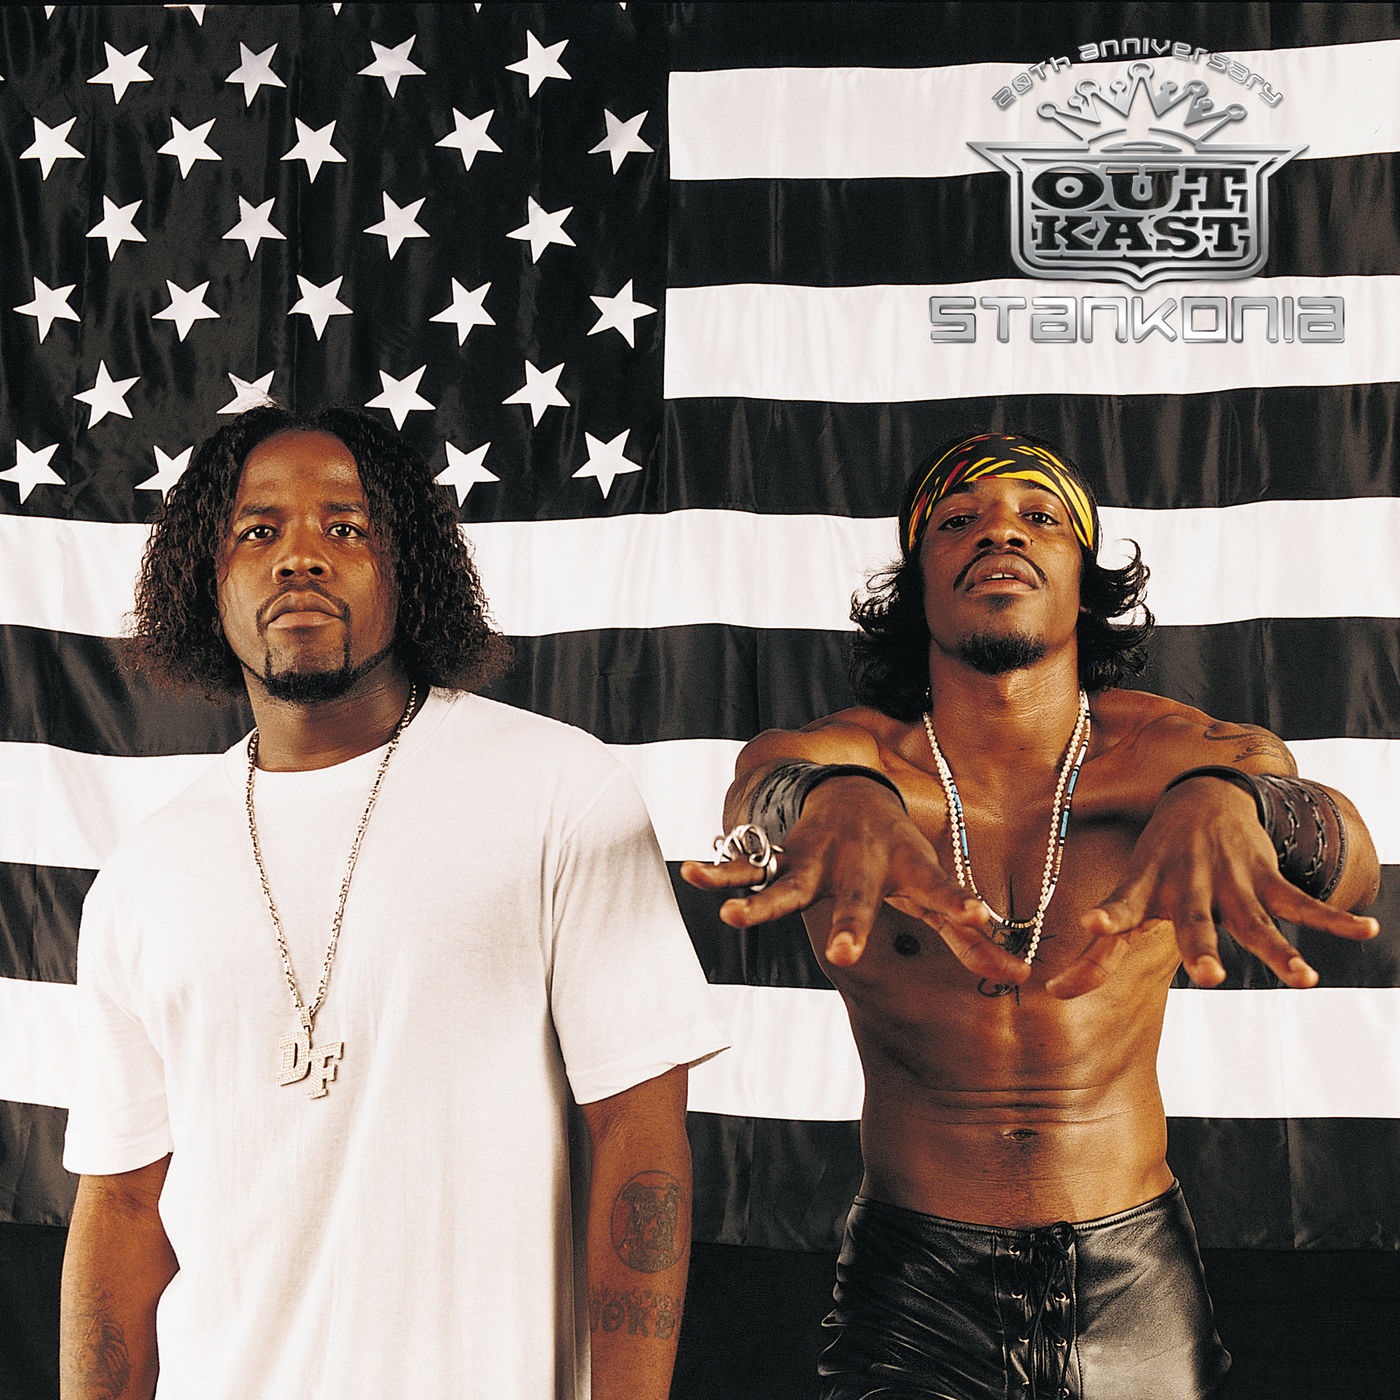 OutKast – Stankonia (20th Anniversary Deluxe) (2000/2020) [FLAC 24bit/44,1kHz]